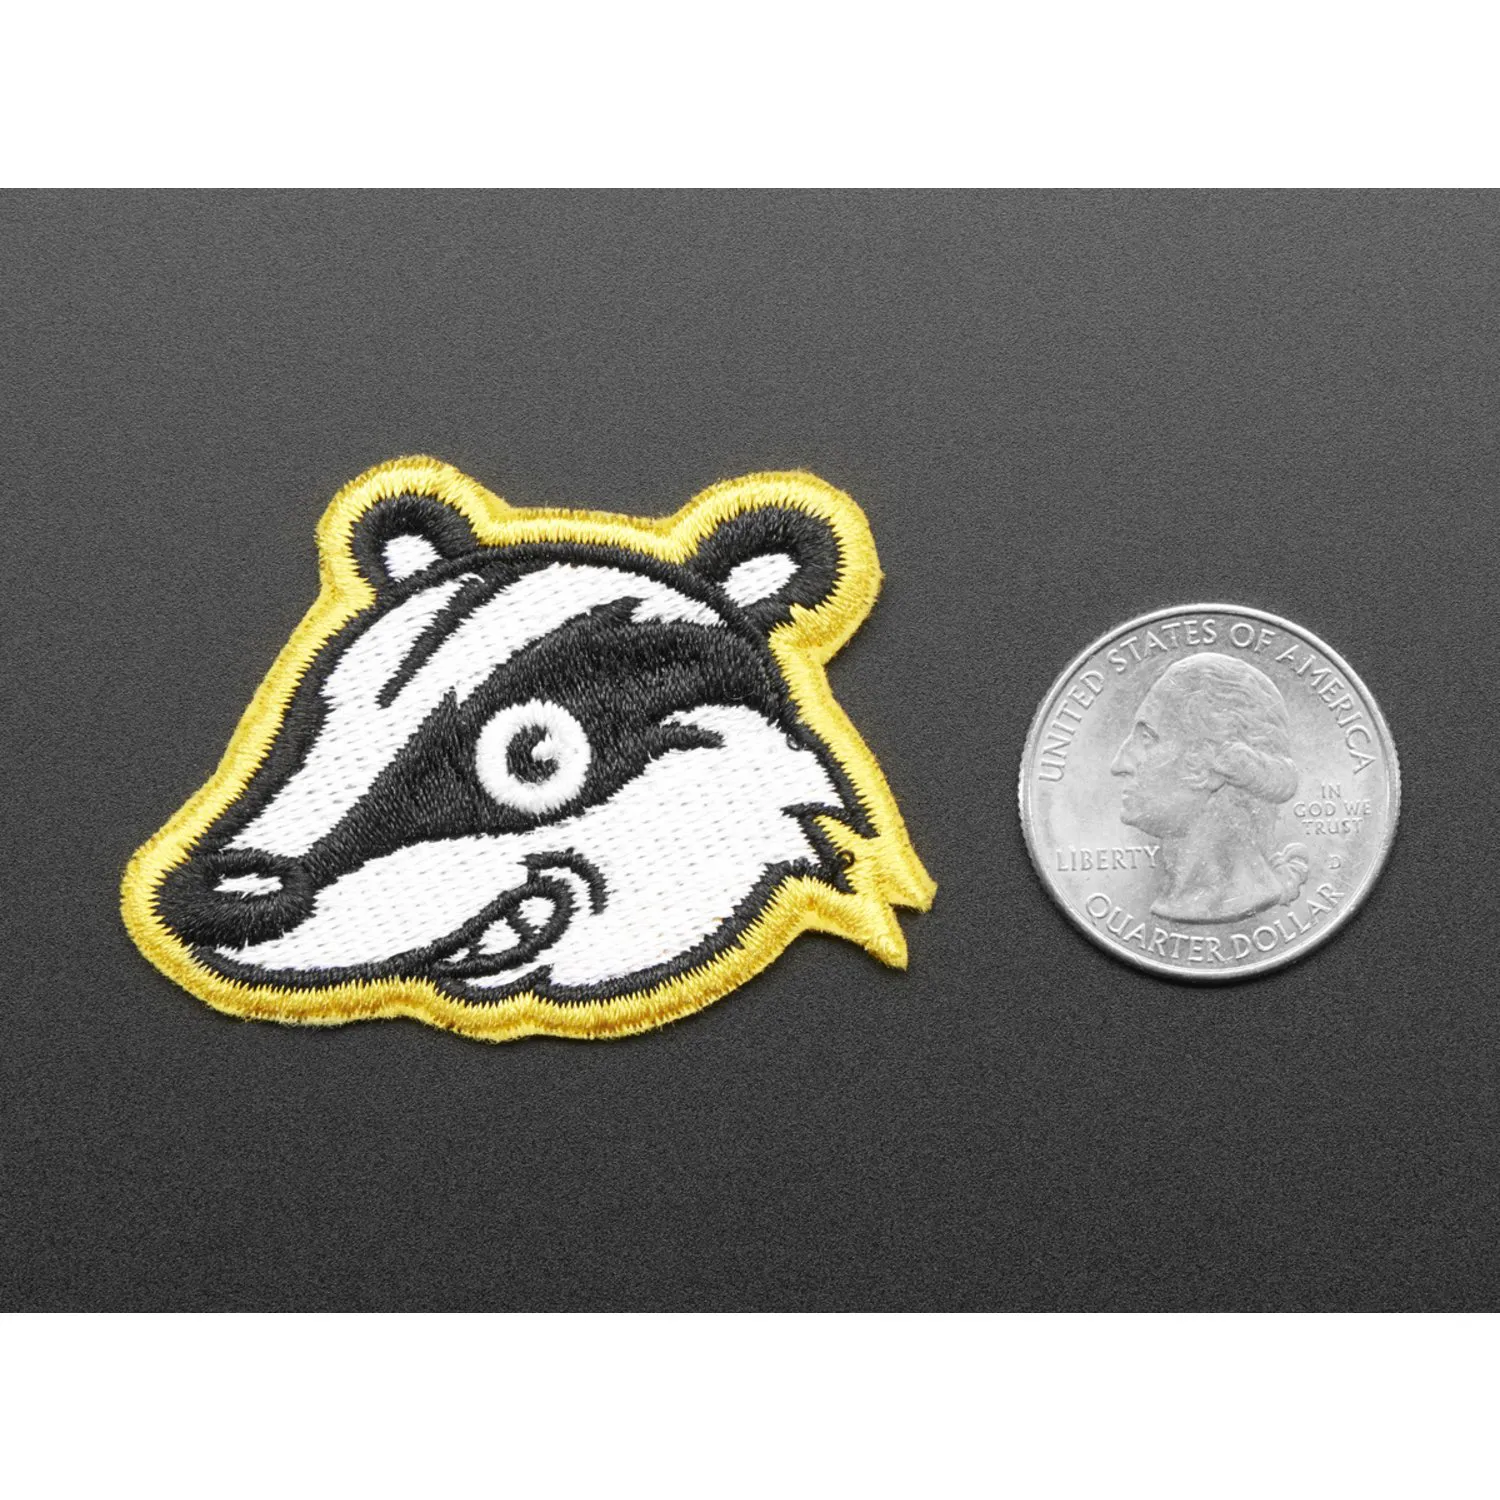 Photo of Privacy Badger - Skill badge, iron-on patch